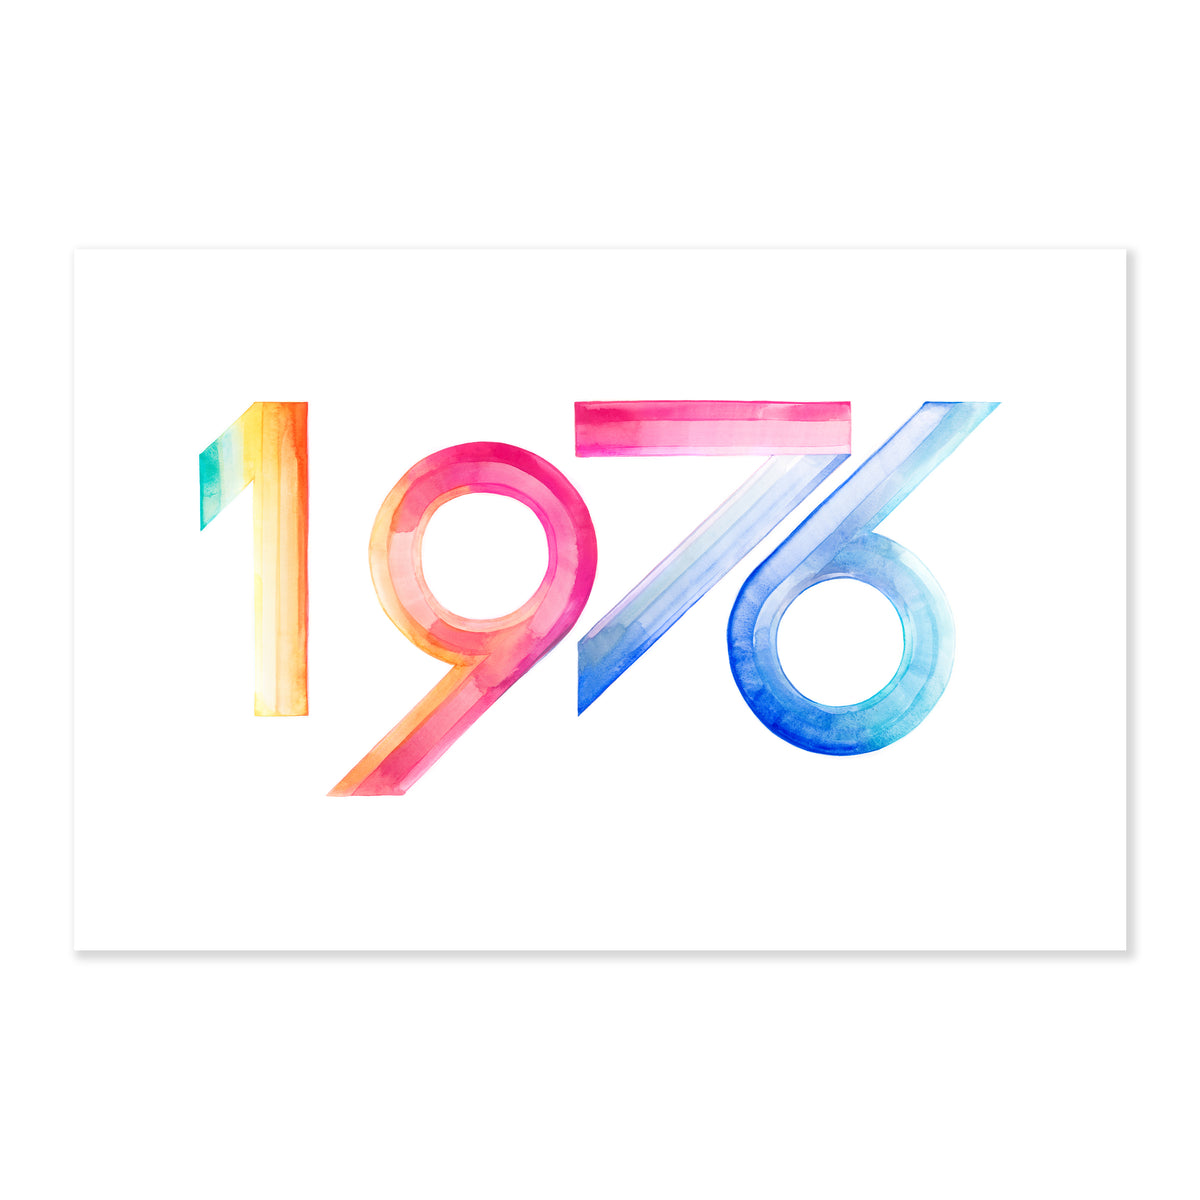 a 22 x 30" watercolor fine art print illustrating the numbers of the year 1976 in the colors green yellow orange pink and blue on a soft white background a watercolor fine art print illustrating the number 1976 in the colors green yellow orange pink and blue on a soft white background